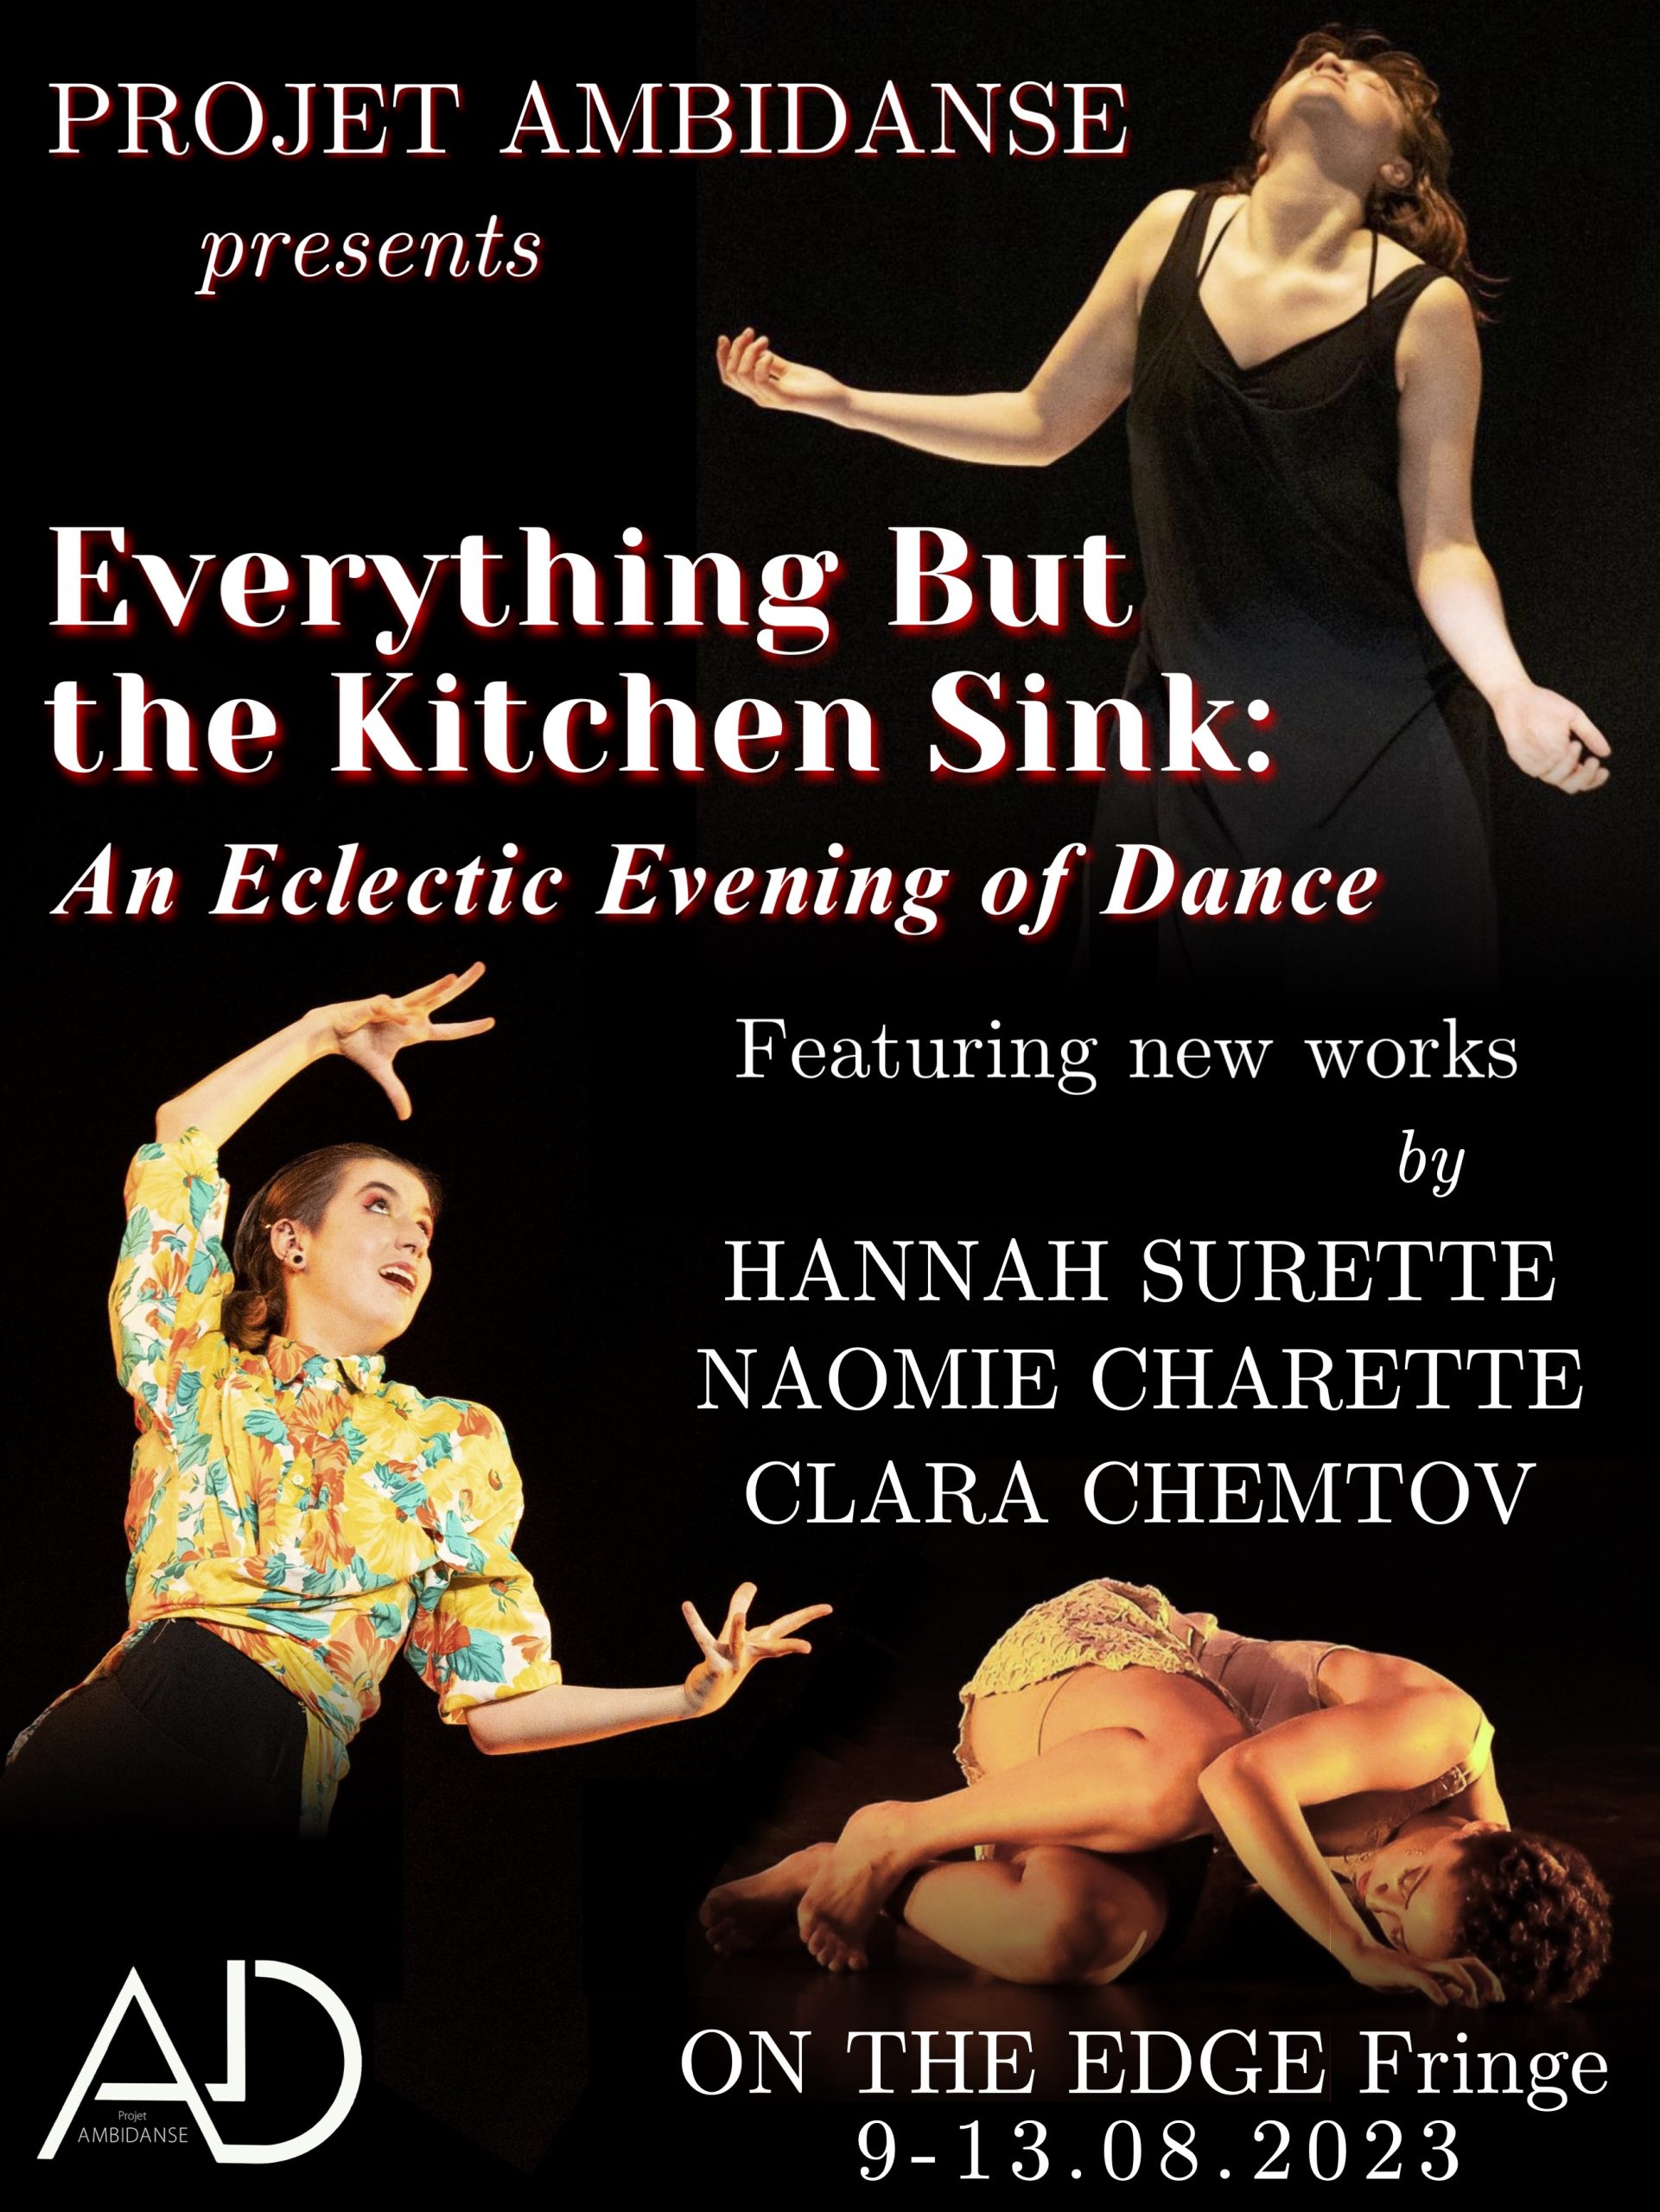 Poster for Projet Ambidanse's "Everything But the Kitchen Sink: An Eclectic Evening of Dance"